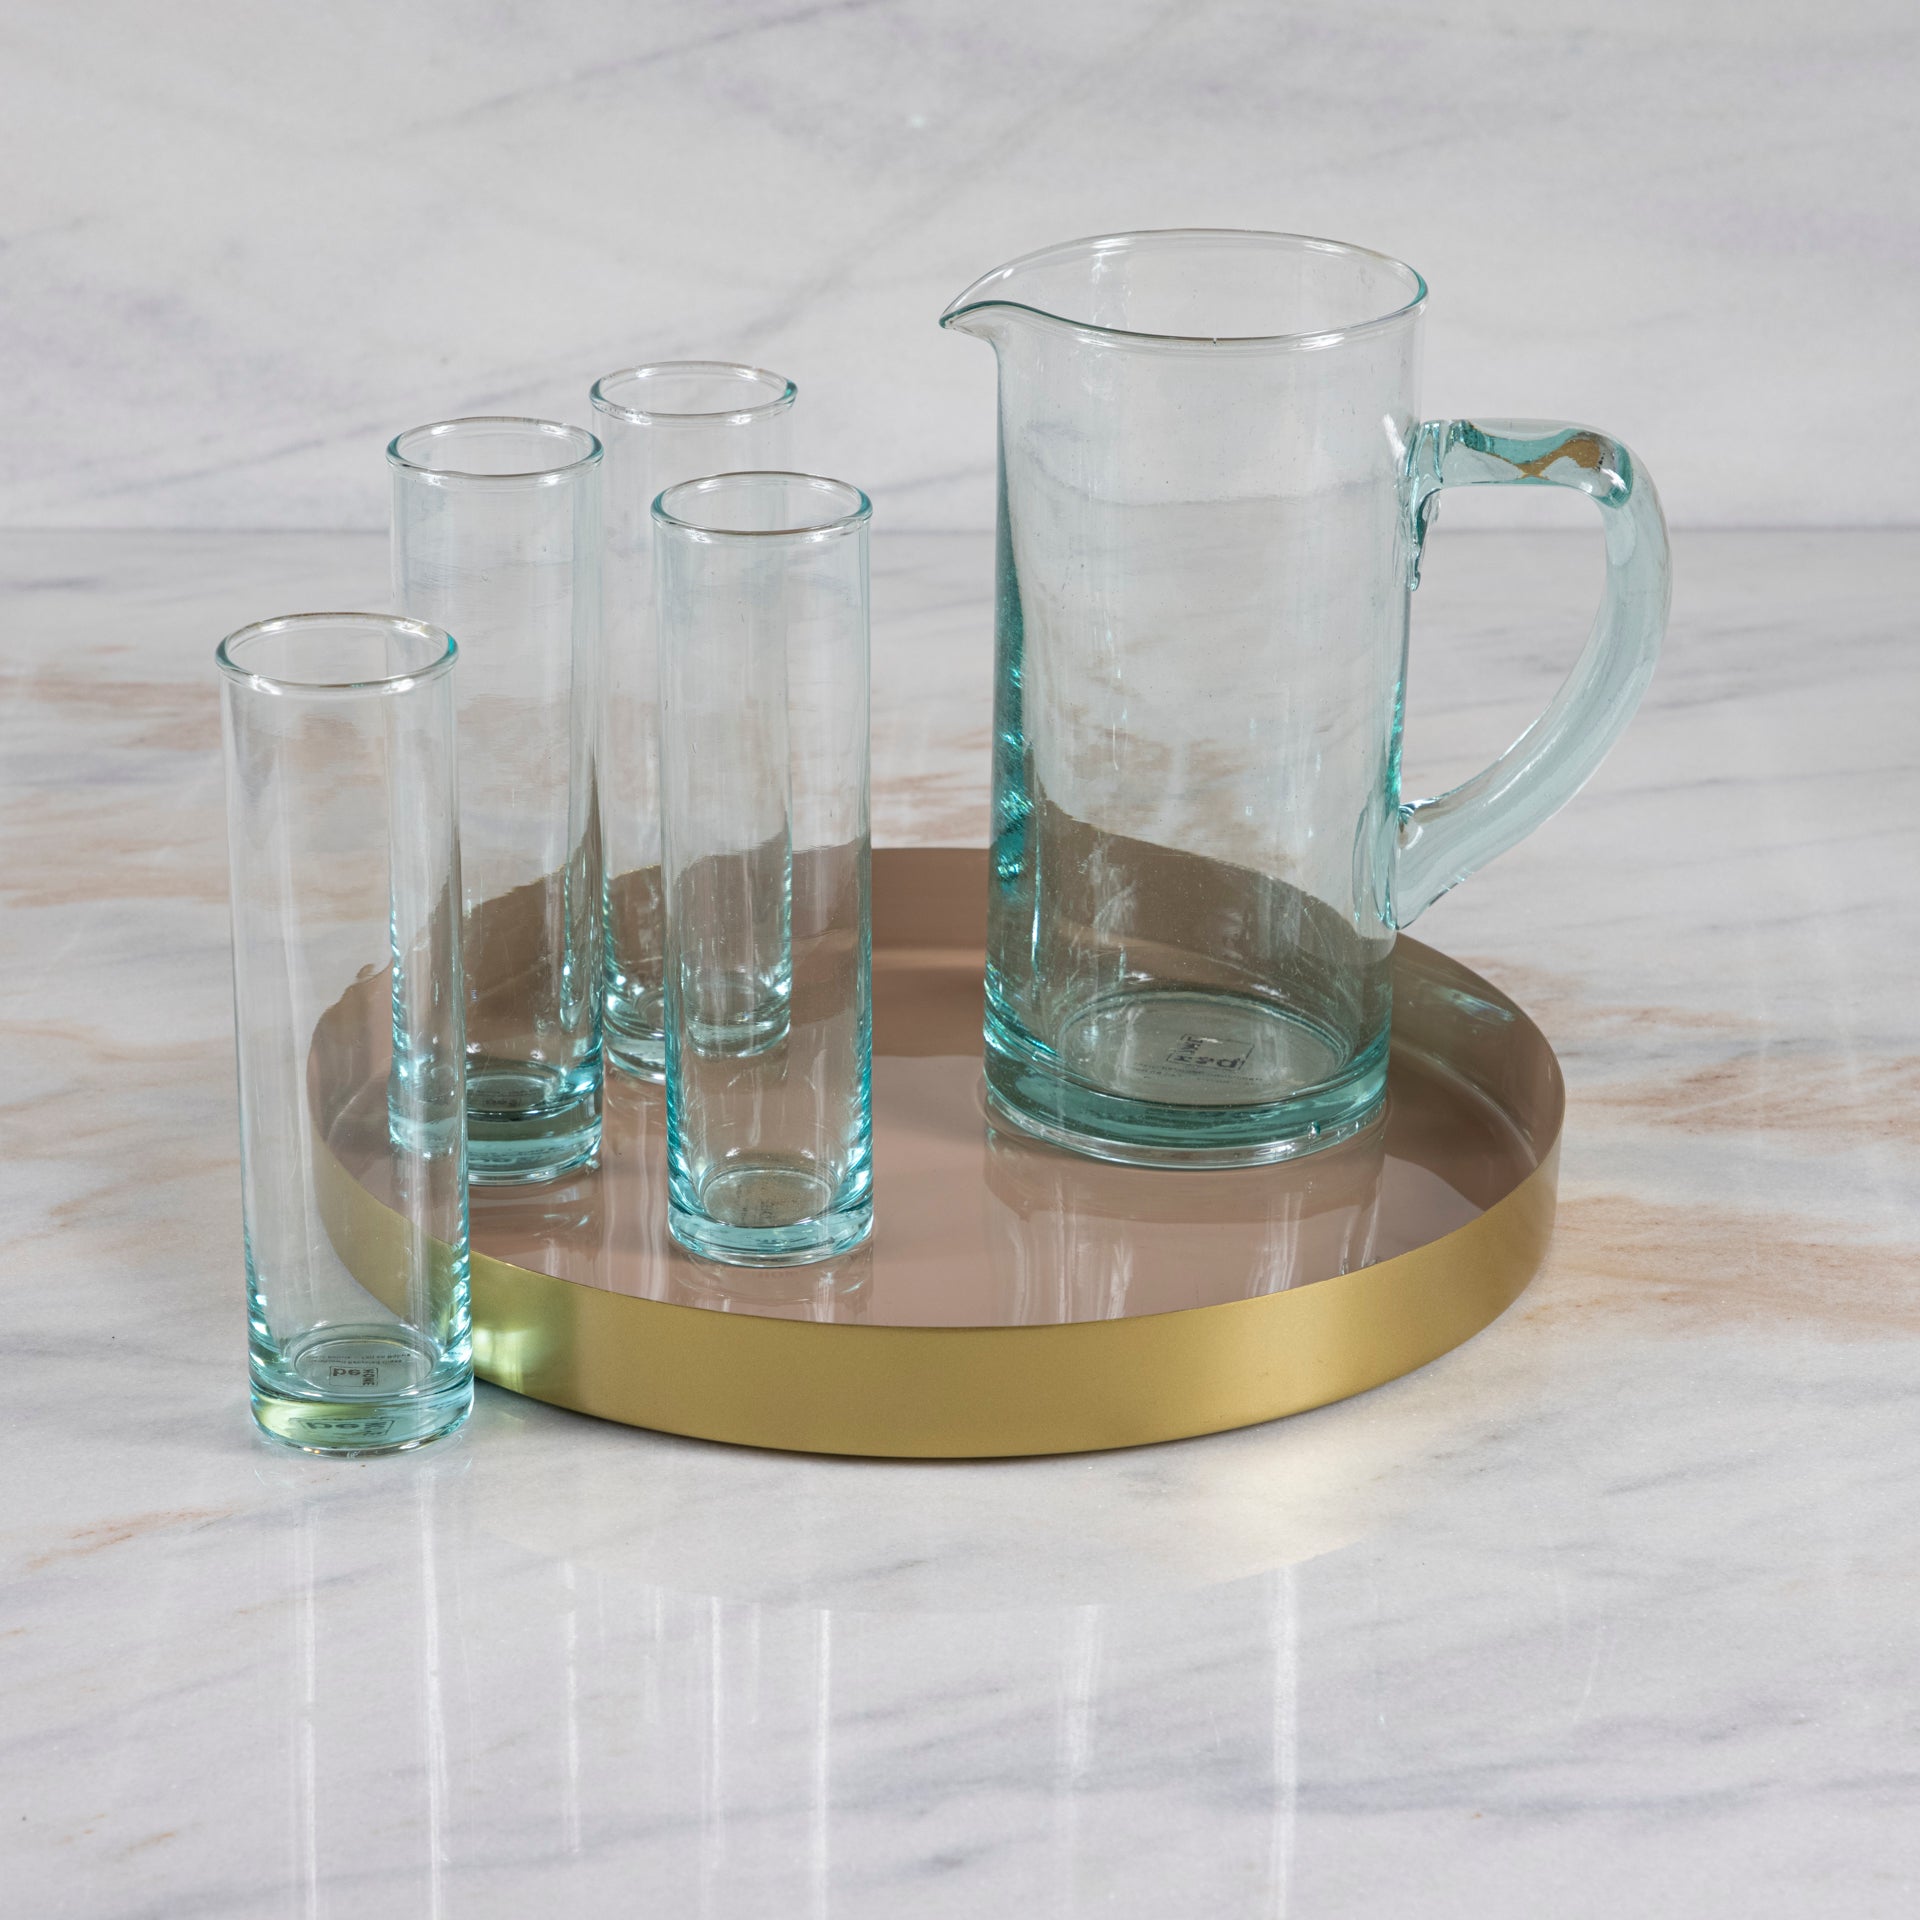 The Marvelous Mimosa Bundle—Premium Recycled Glass